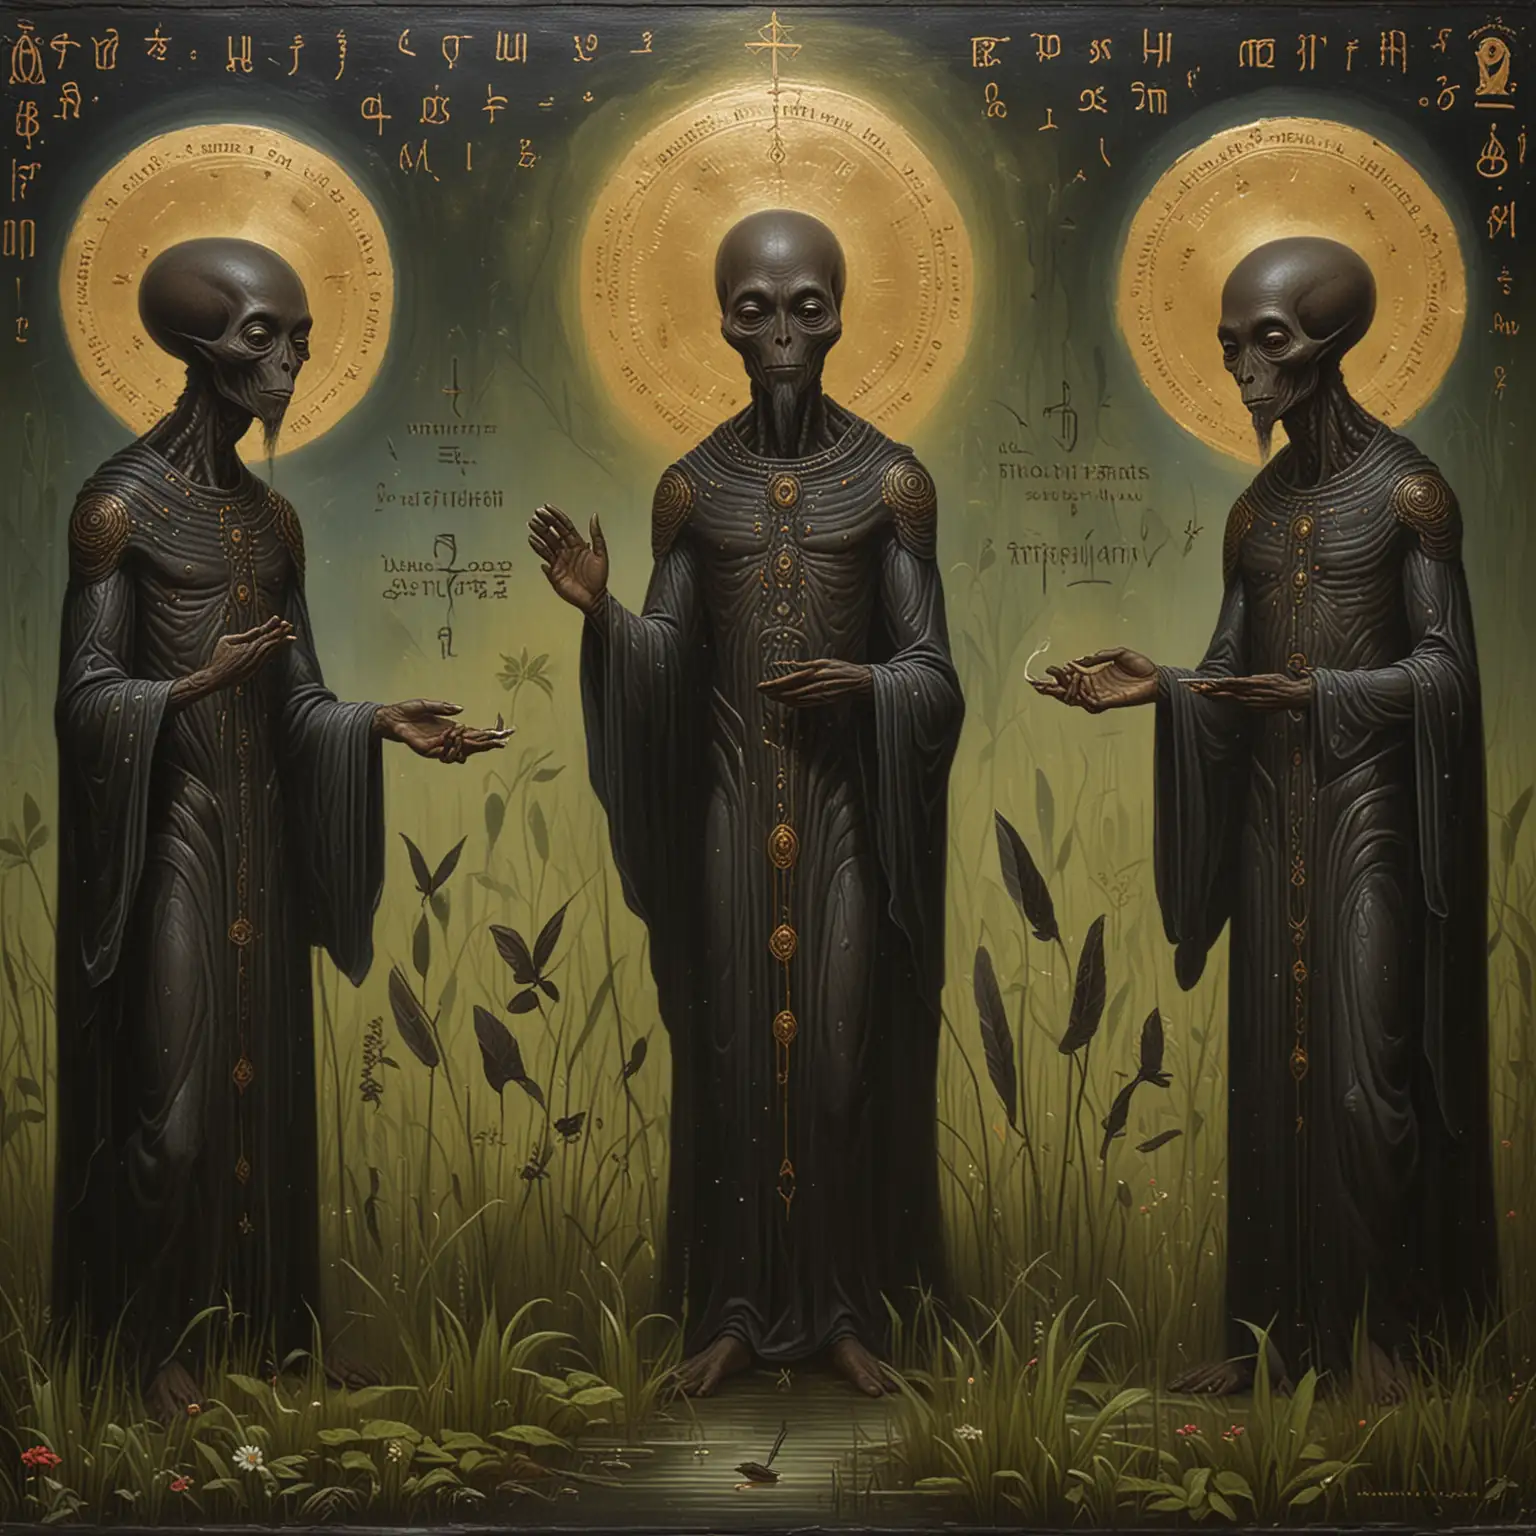 Swamp Mysticism, slavonic style Ortxodoxy Icon::3 old icon master tempera painting of black skin Aliens as holy writers::0.22 and holy inscriptions and shrine::3